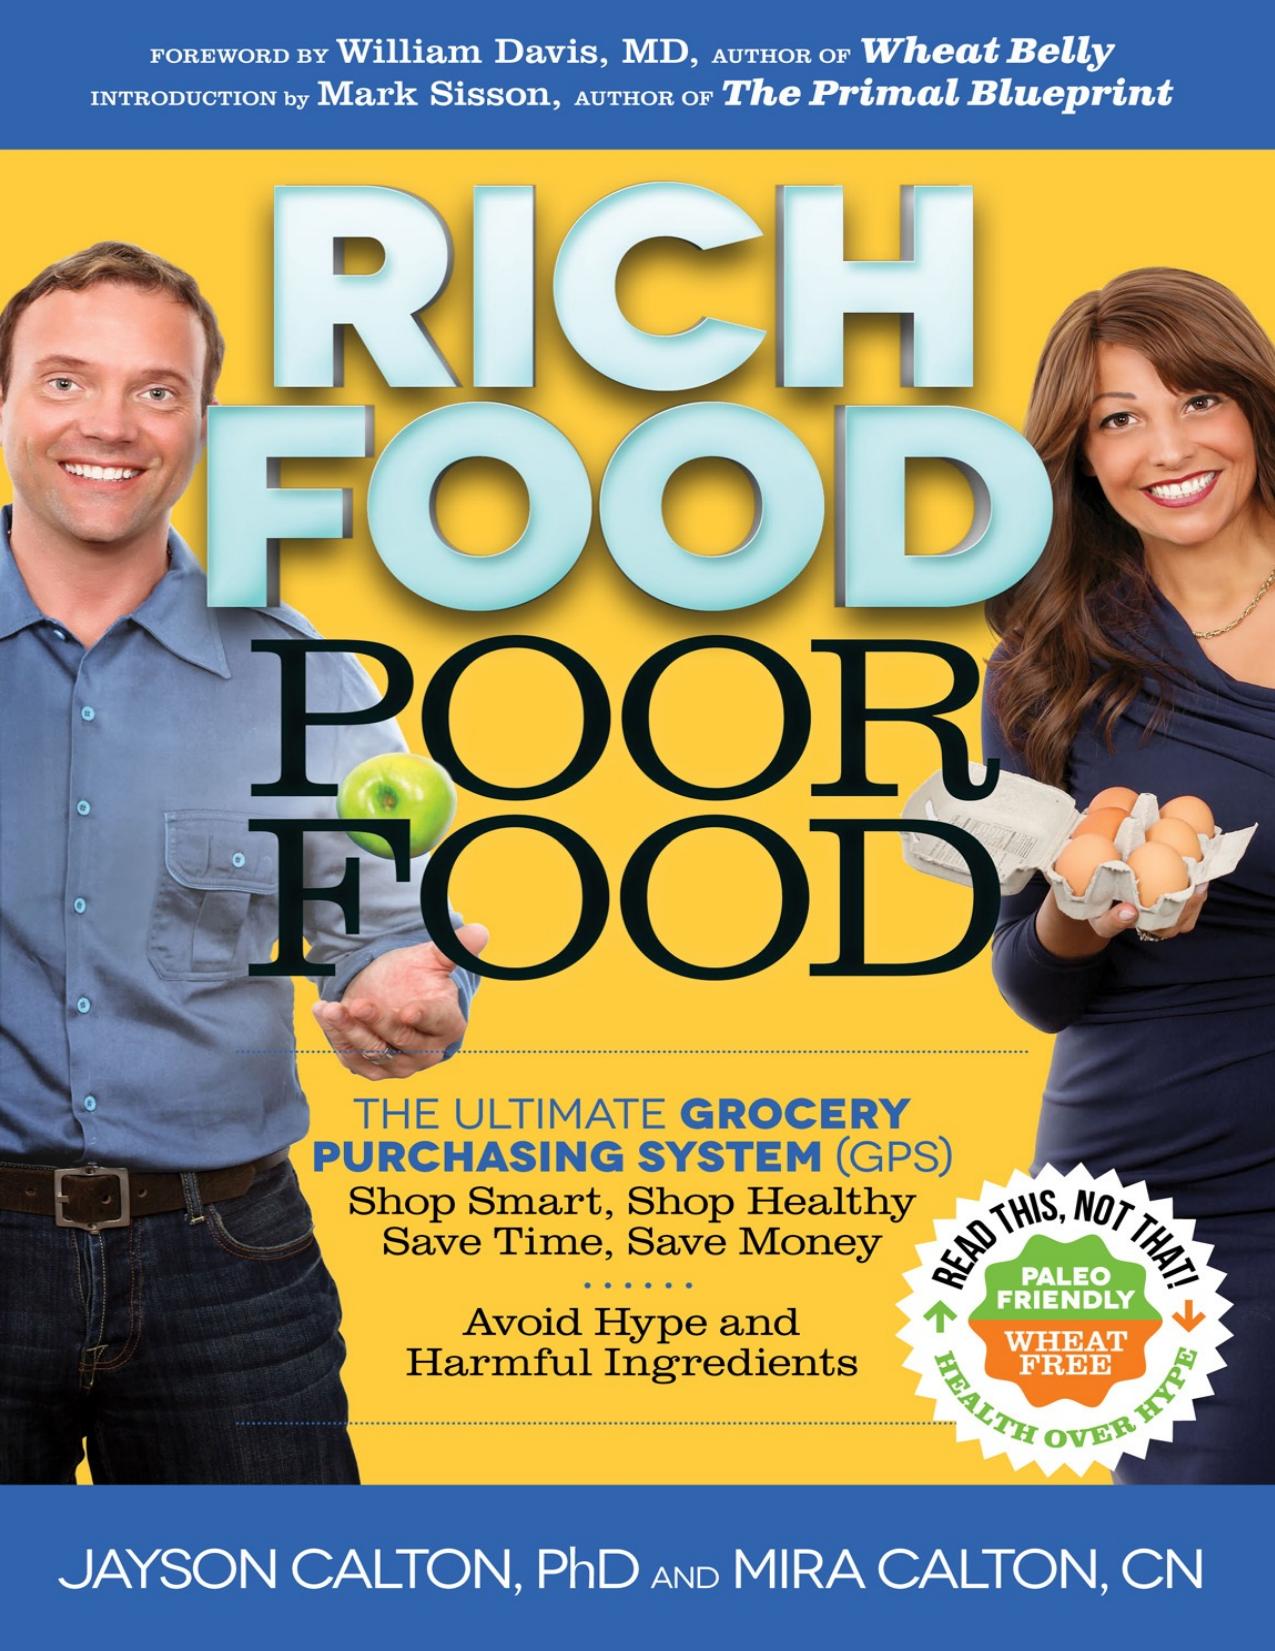 Rich Food Poor Food: The Ultimate Grocery Purchasing System - PDFDrive.com